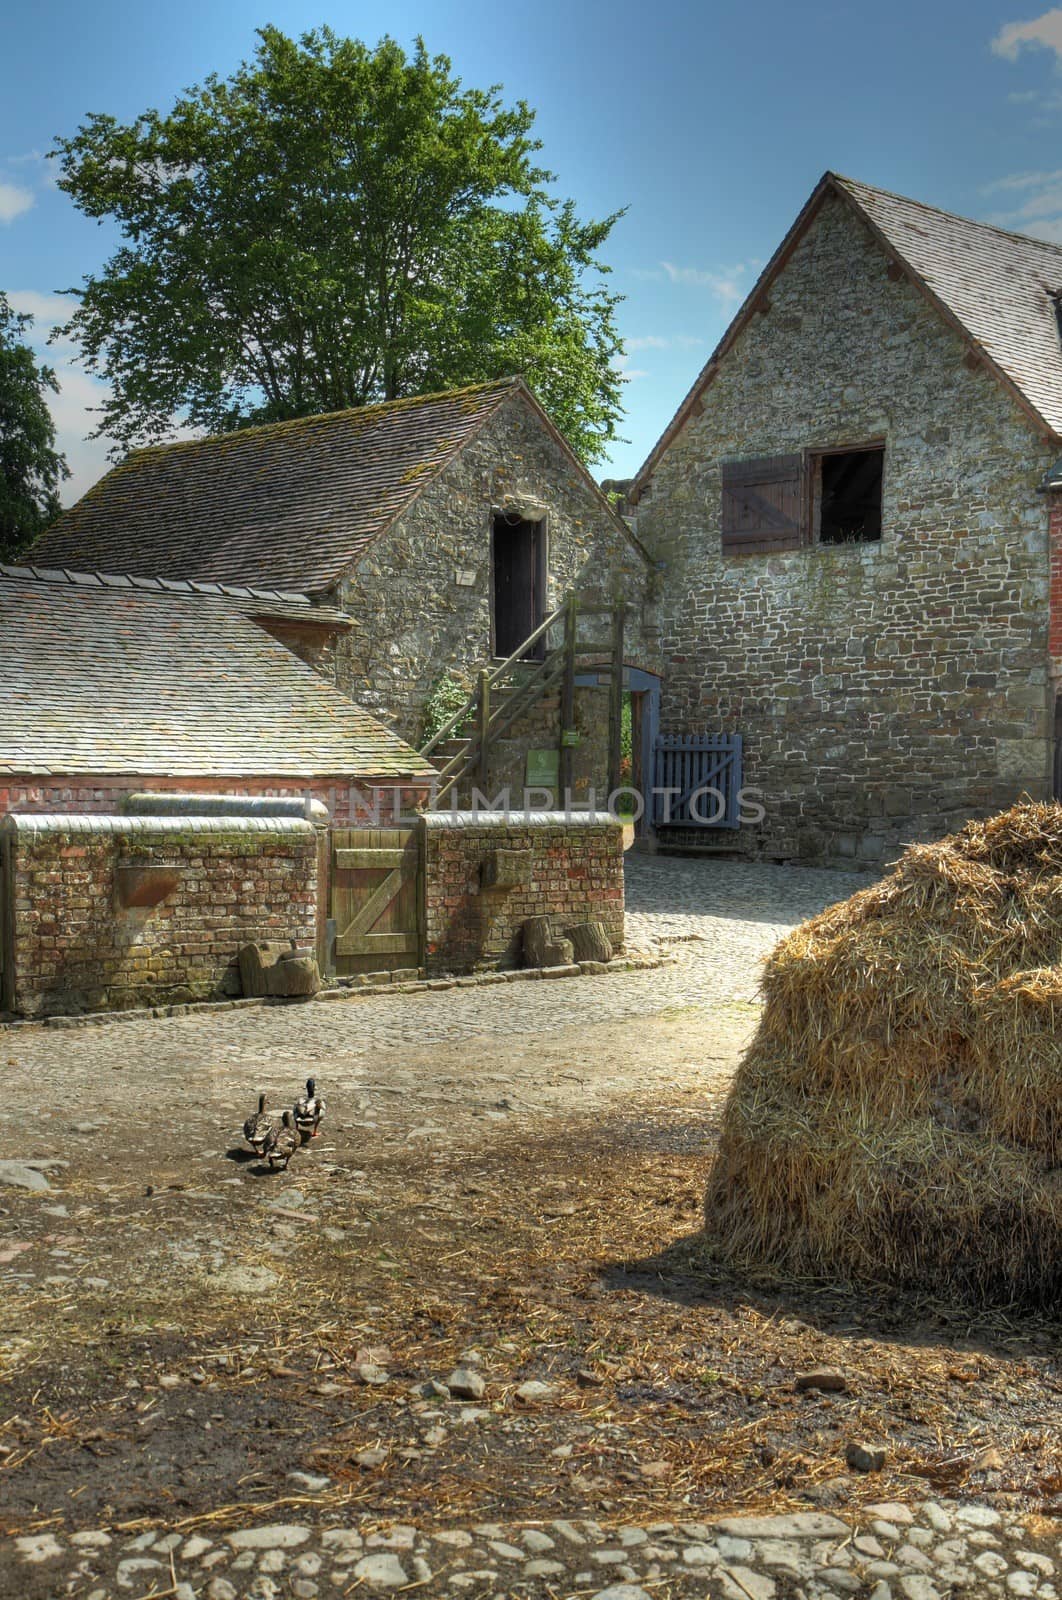 Traditional English farmyard with ducks and muck heap.